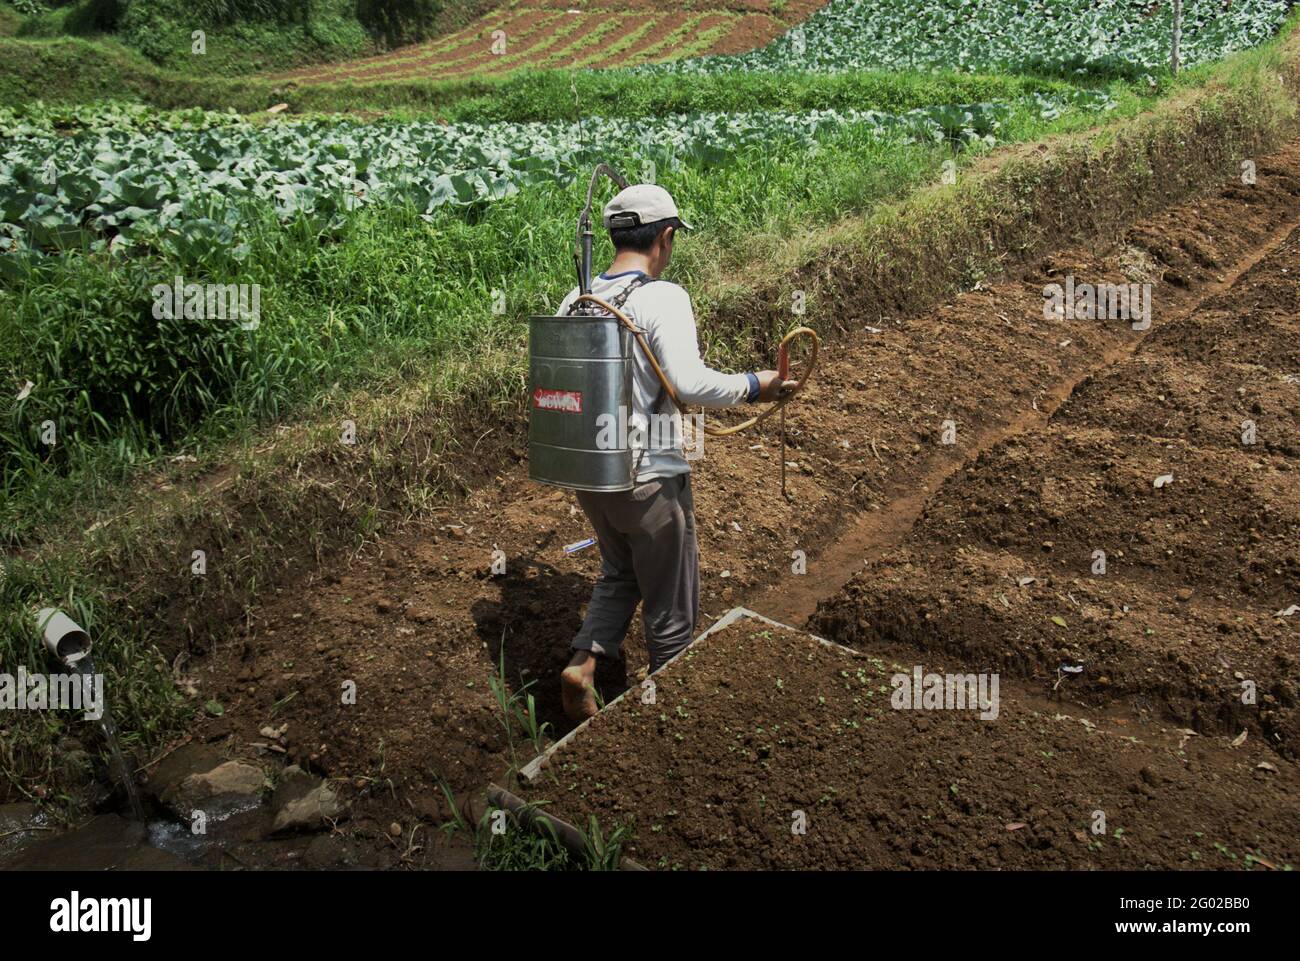 A vegetable farmer carrying a pesticide sprayer as he is walking through agricultural field in Pacet, Cianjur, West Java, Indonesia. Climate change will influence food production via direct and indirect effects on crop growth processes, according to a 2021 scientific assessment focusing on climate risk, which was published by The World Bank Group and Asian Development Bank. Indirect effects include changes in pest and disease profiles, among others. Stock Photo